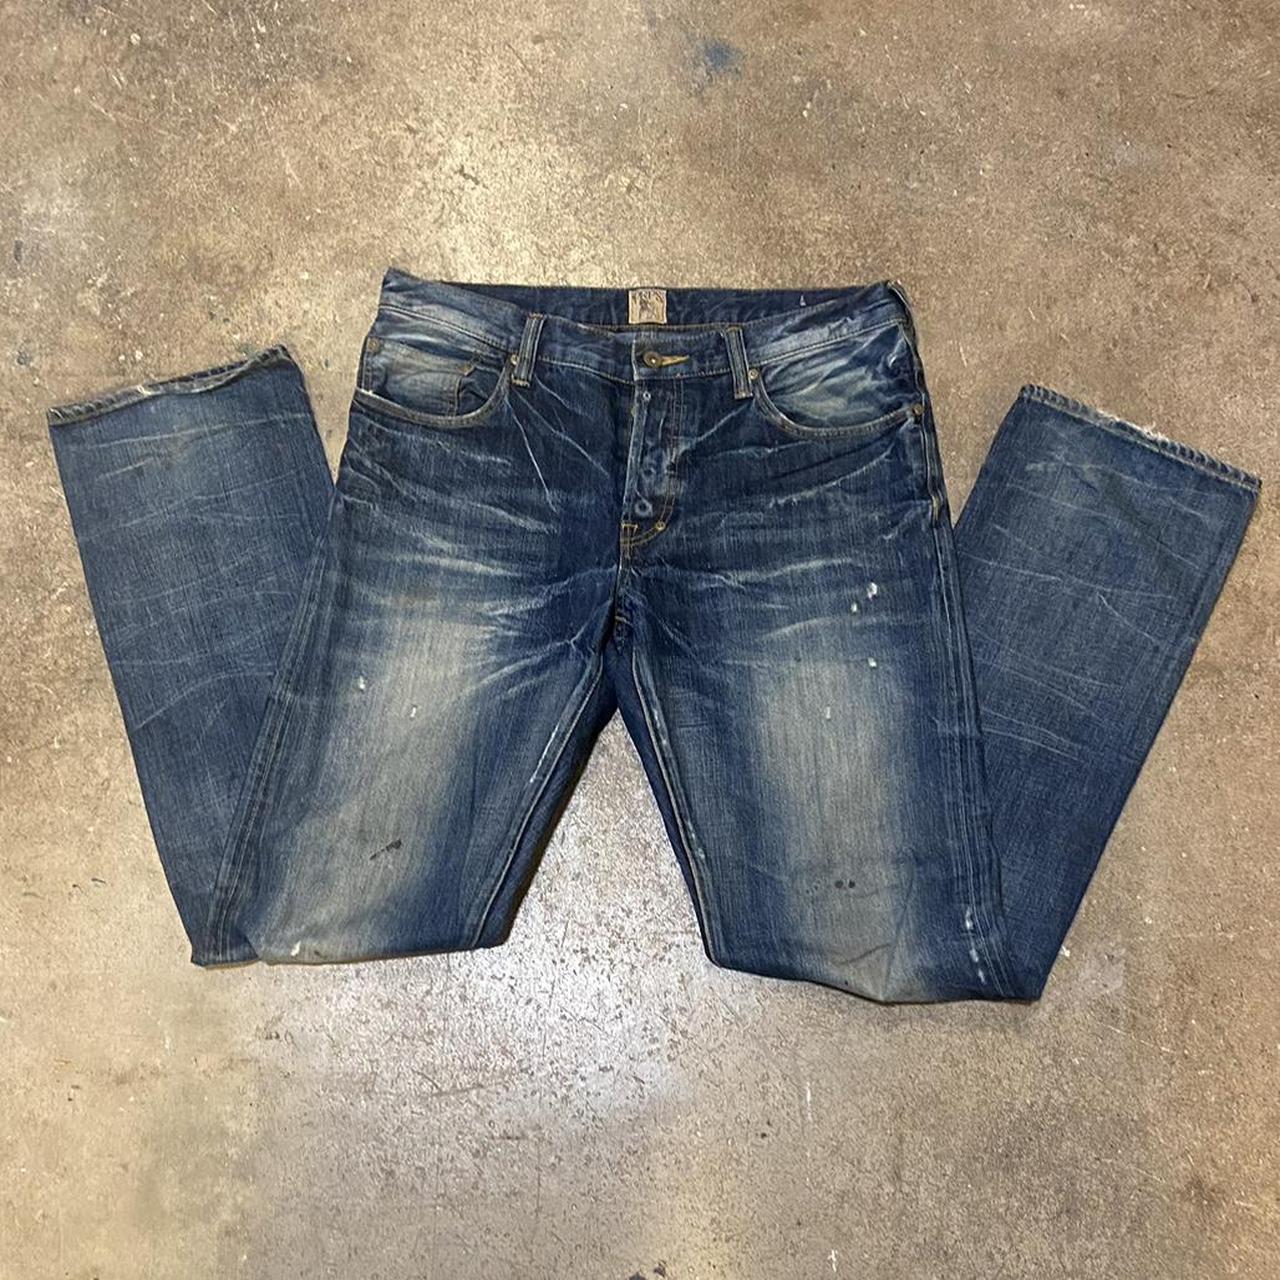 PRPS Rambler (10 Months, 1 Wash, 2 Soaks) - Fade of the Day